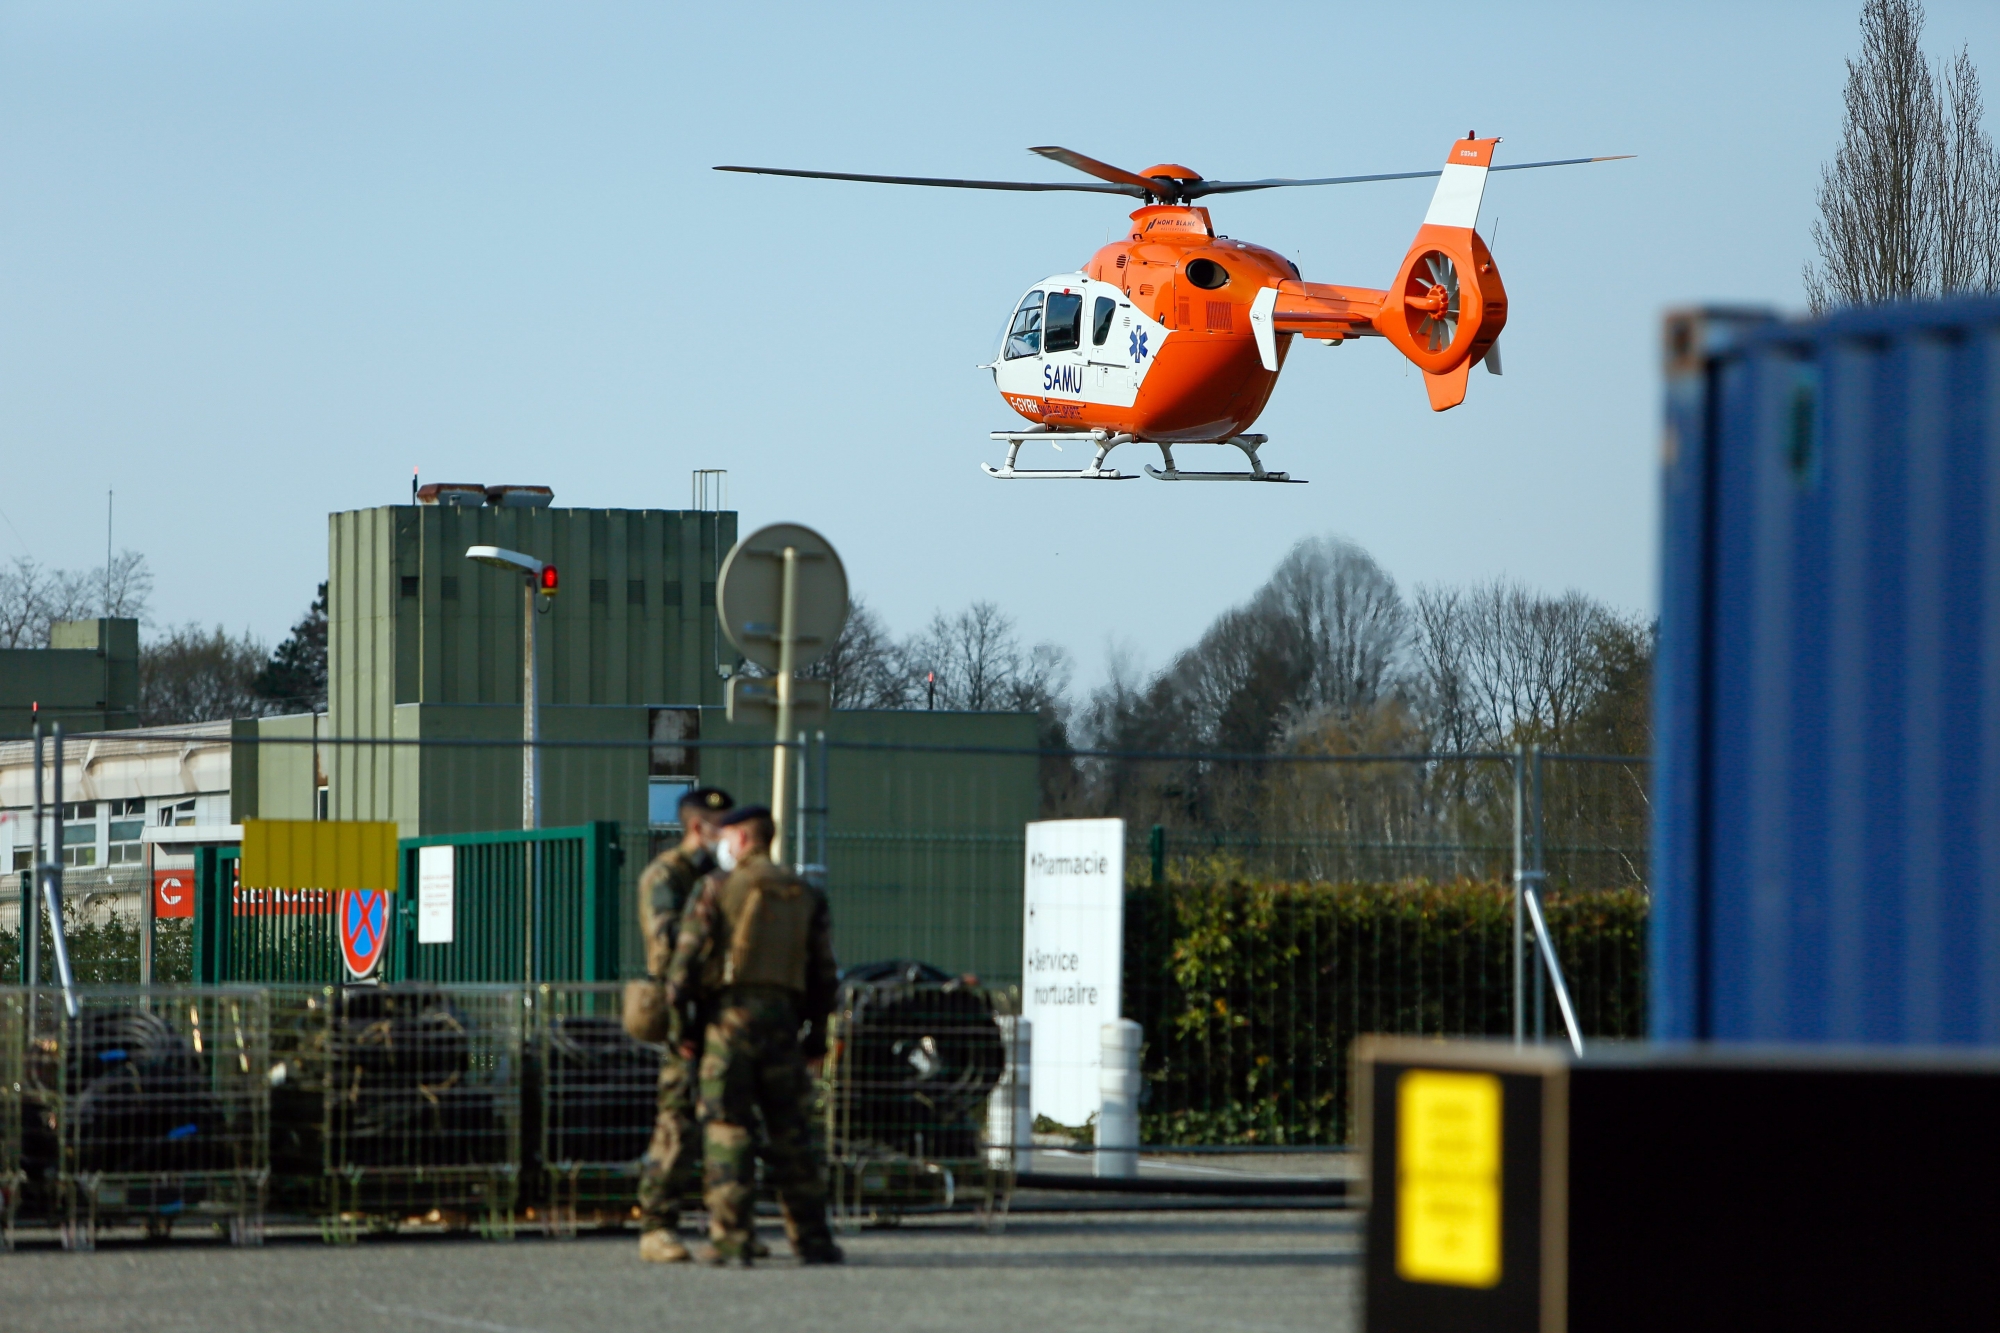 epa08322720 A medical helicopter takes off from the Emile Muller hospital in Mulhouse, eastern France, 25 March 2020, on the tenth day of a strict lockdown in France to stop the spread of COVID-19. EPA/CUGNOT MATHIEU / POOL FRANCE POLITICS HEALTH COVID19 CORONAVIRUS